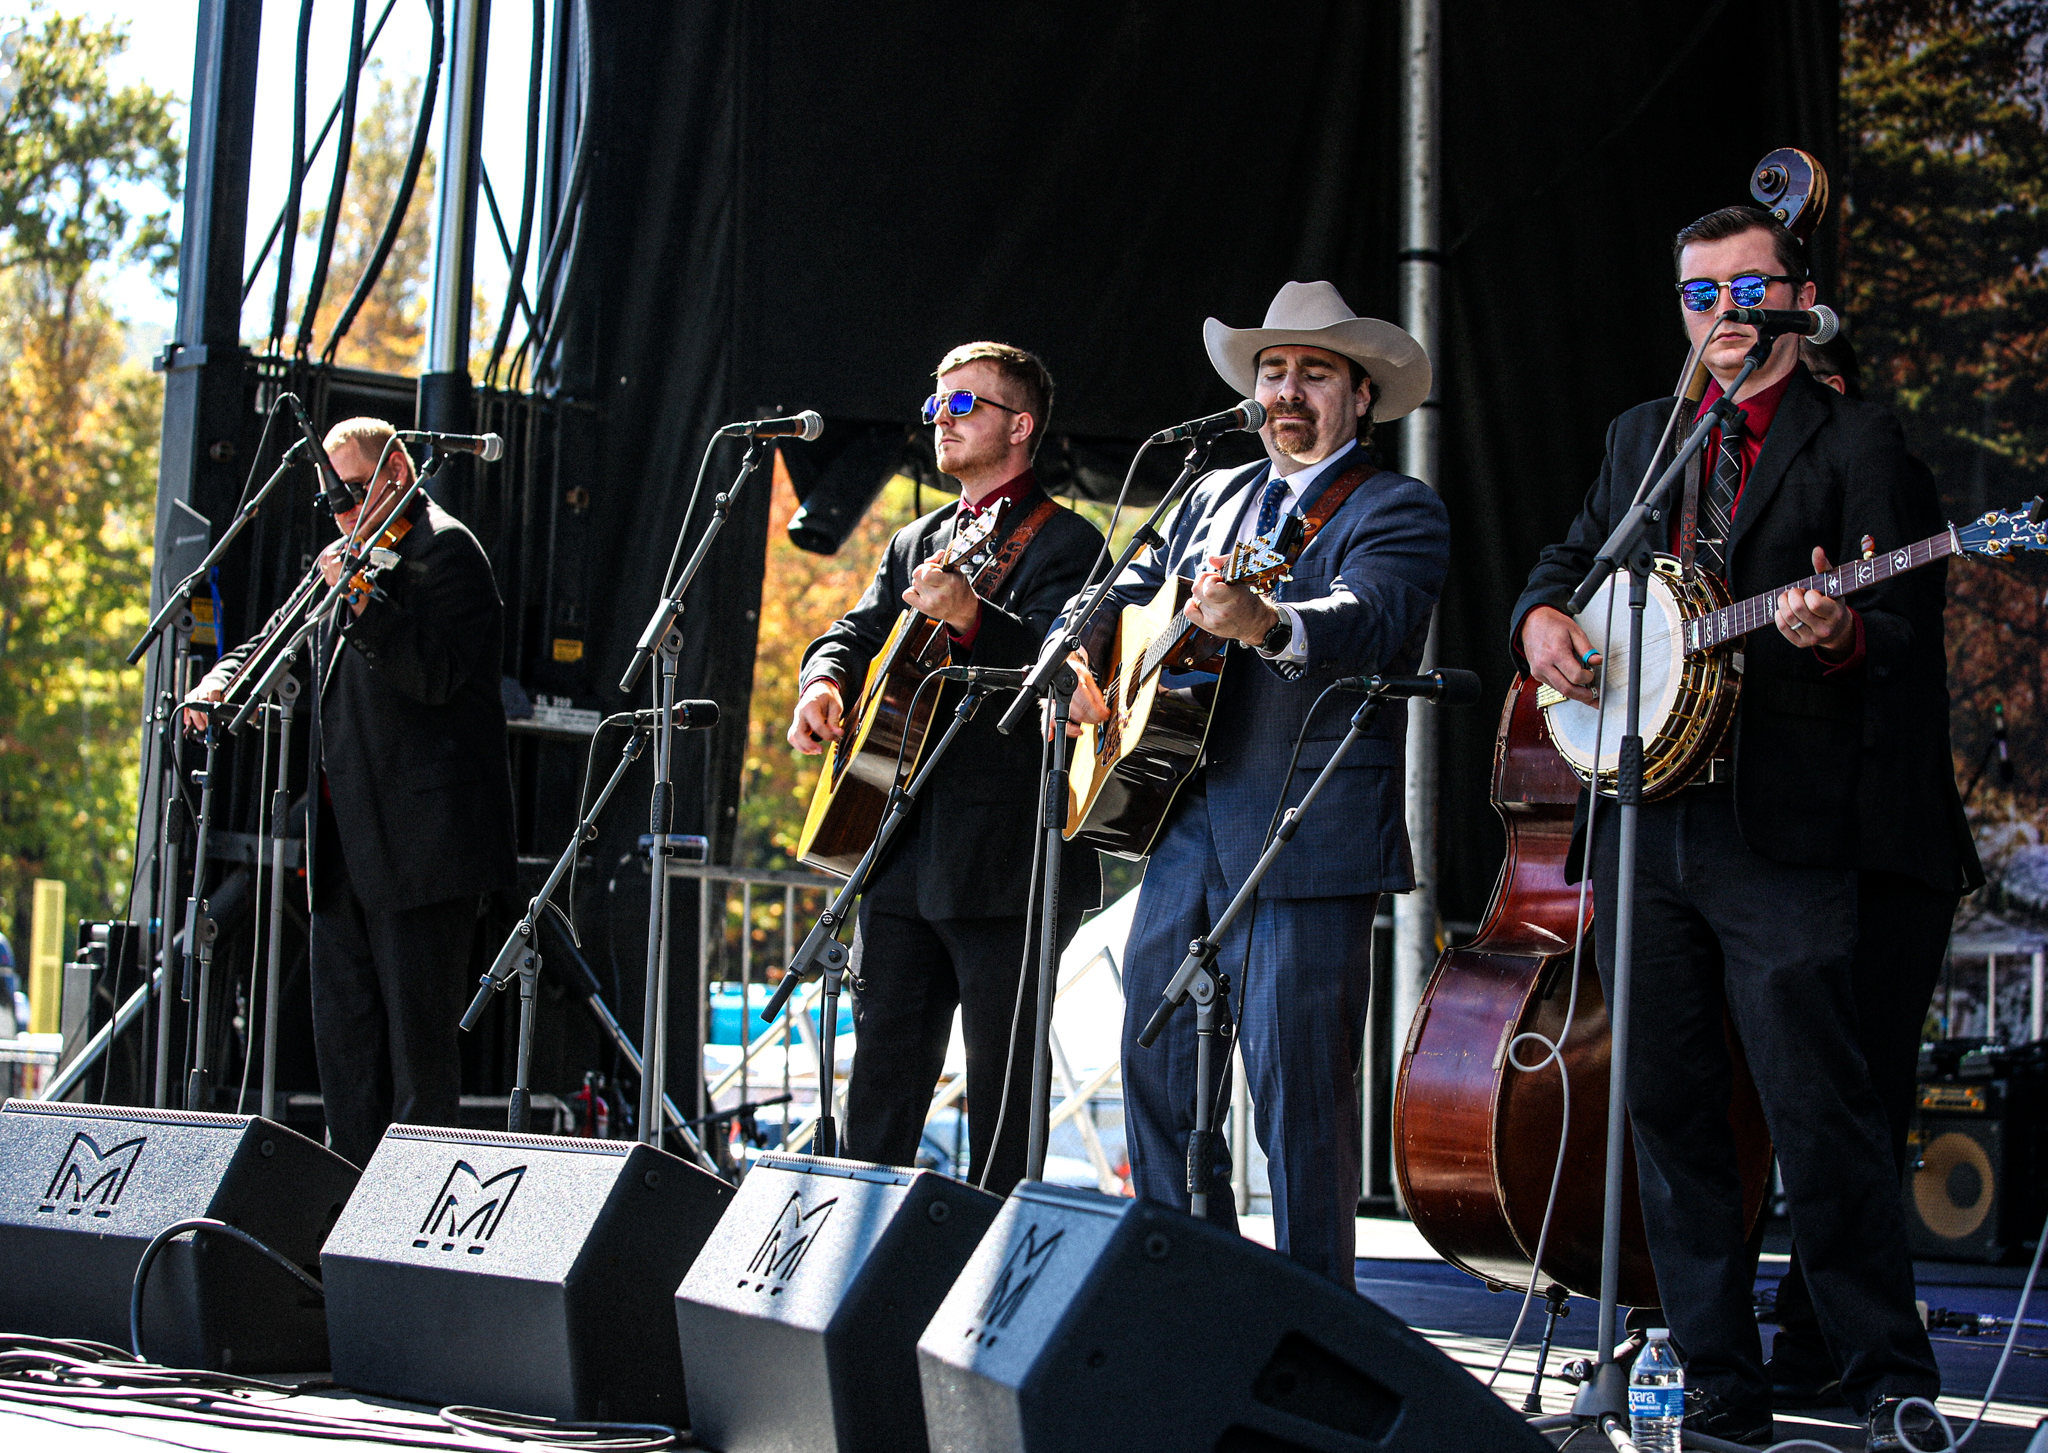 Blue Highway Festival is a great bluegrass festival in south-west Virginia. 